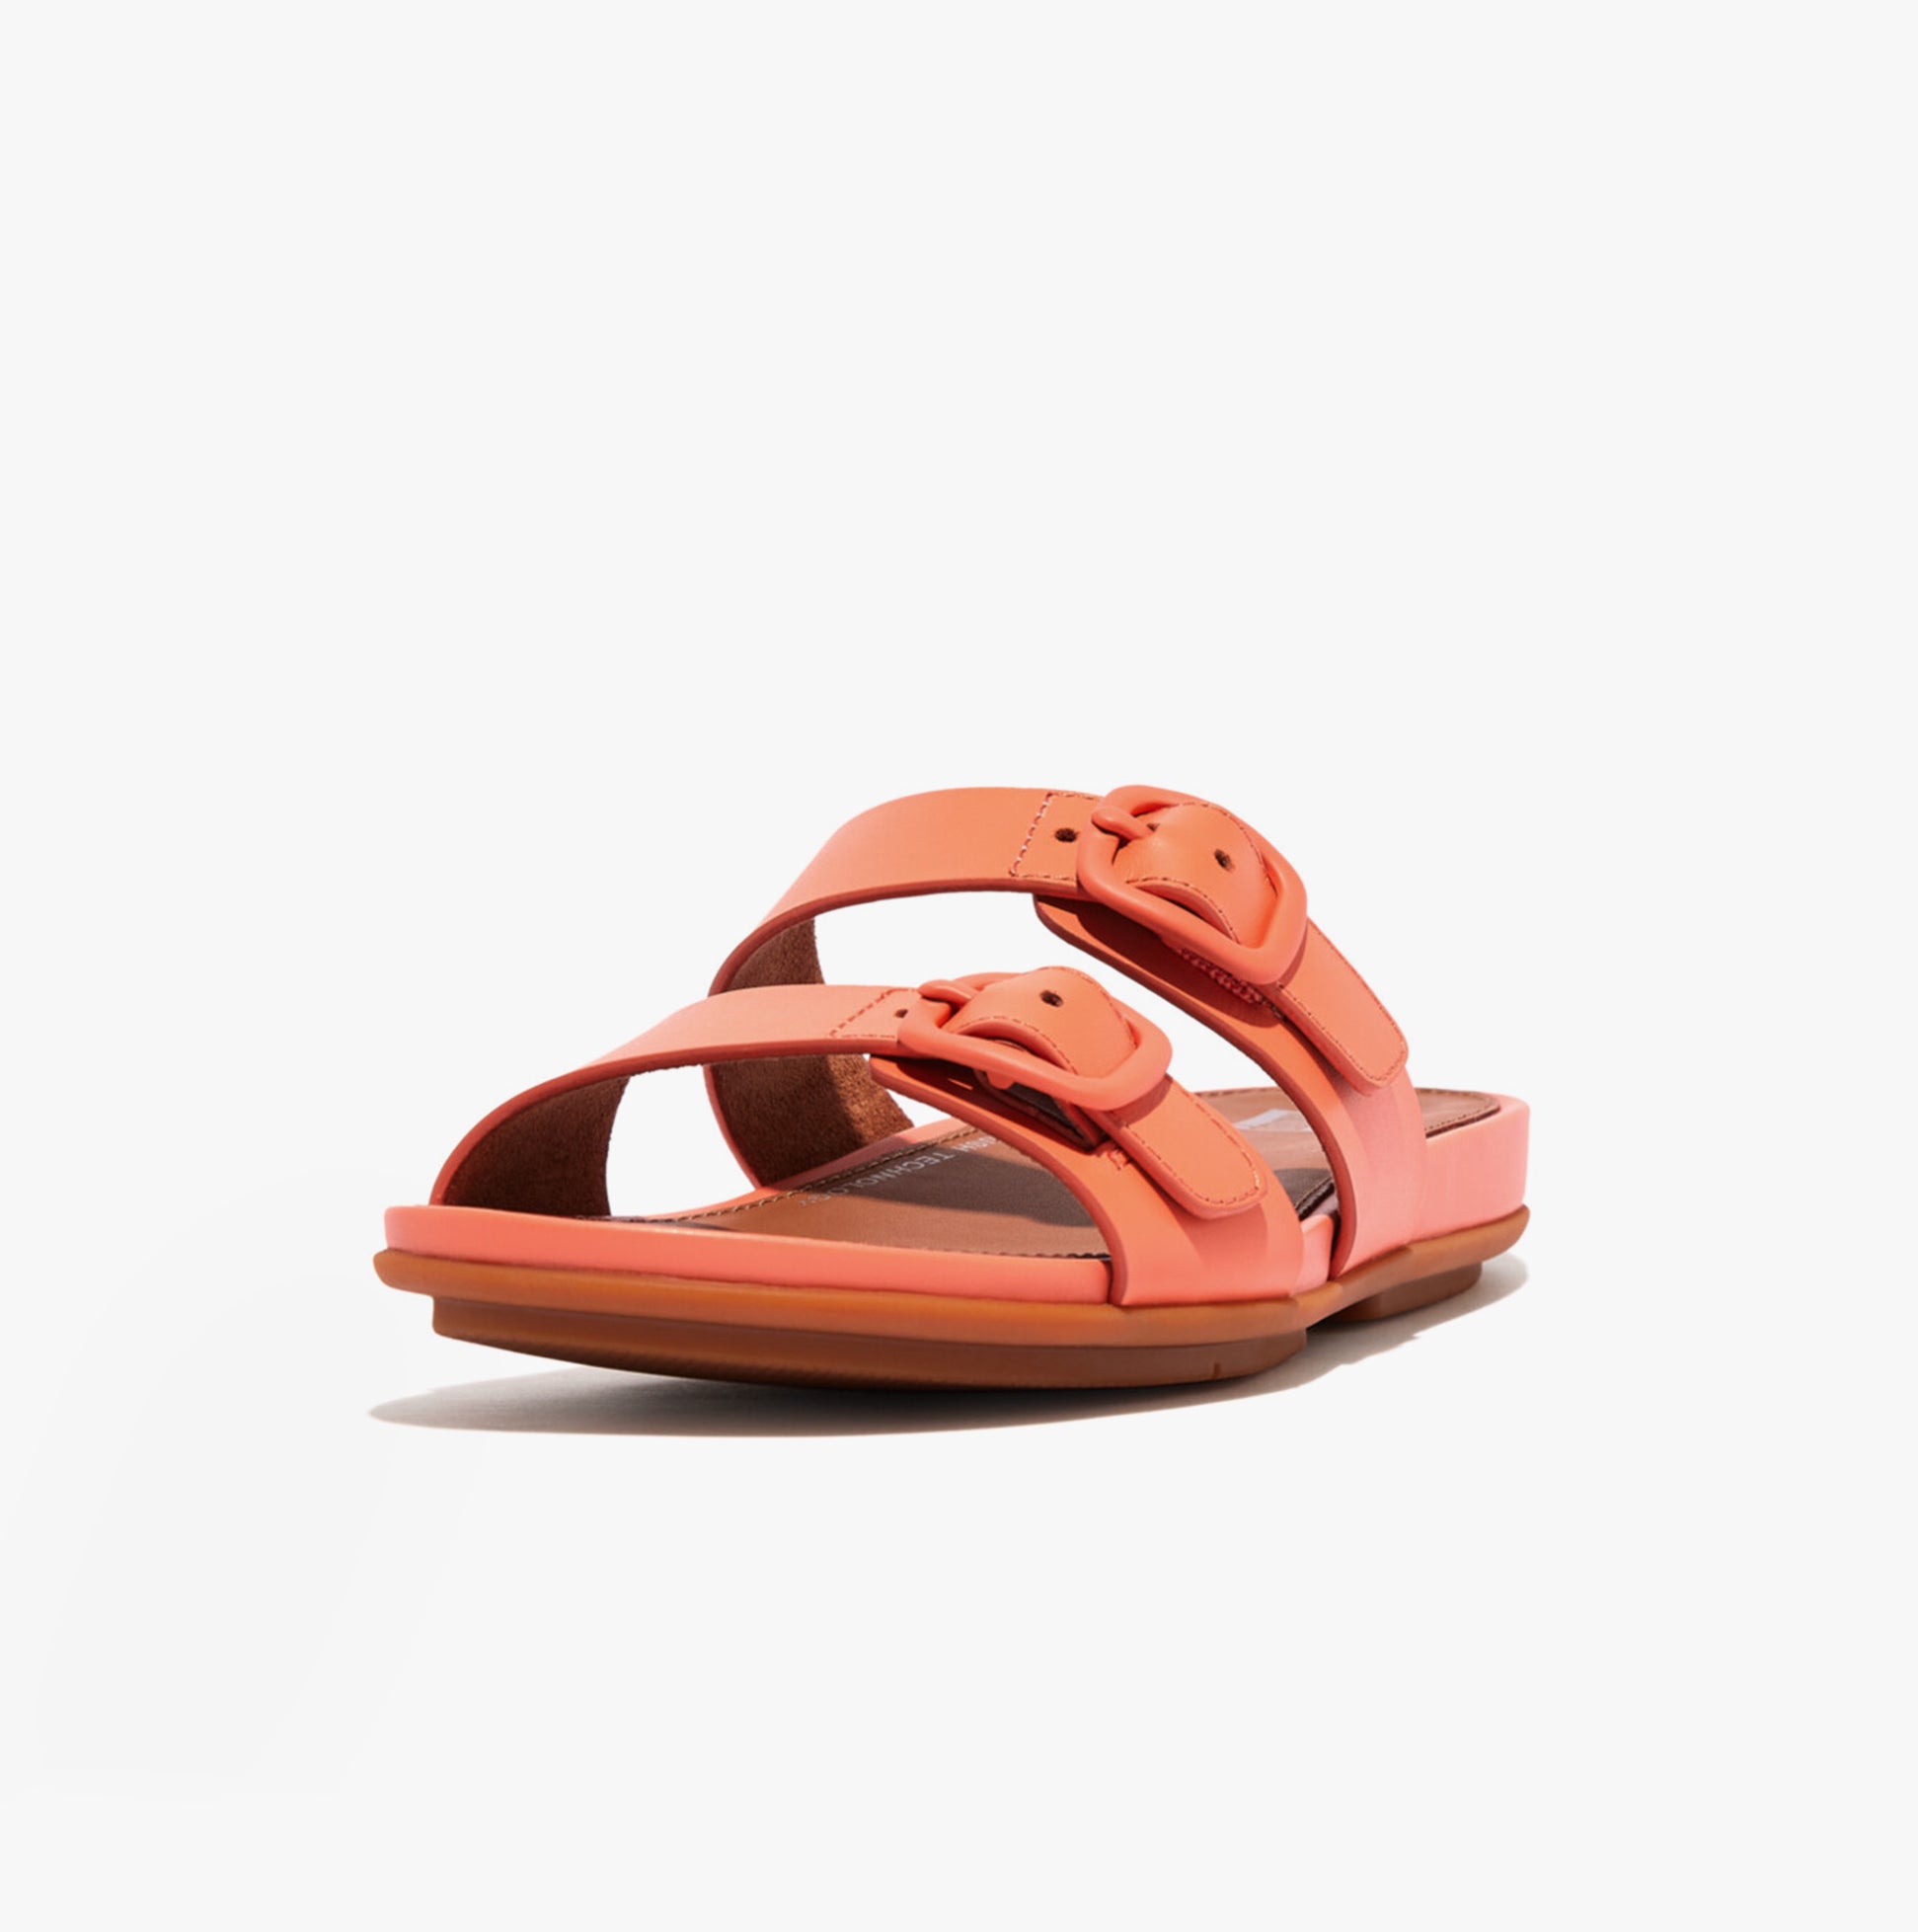 FitFlop-[FV1-580]-Coral-4.jpg